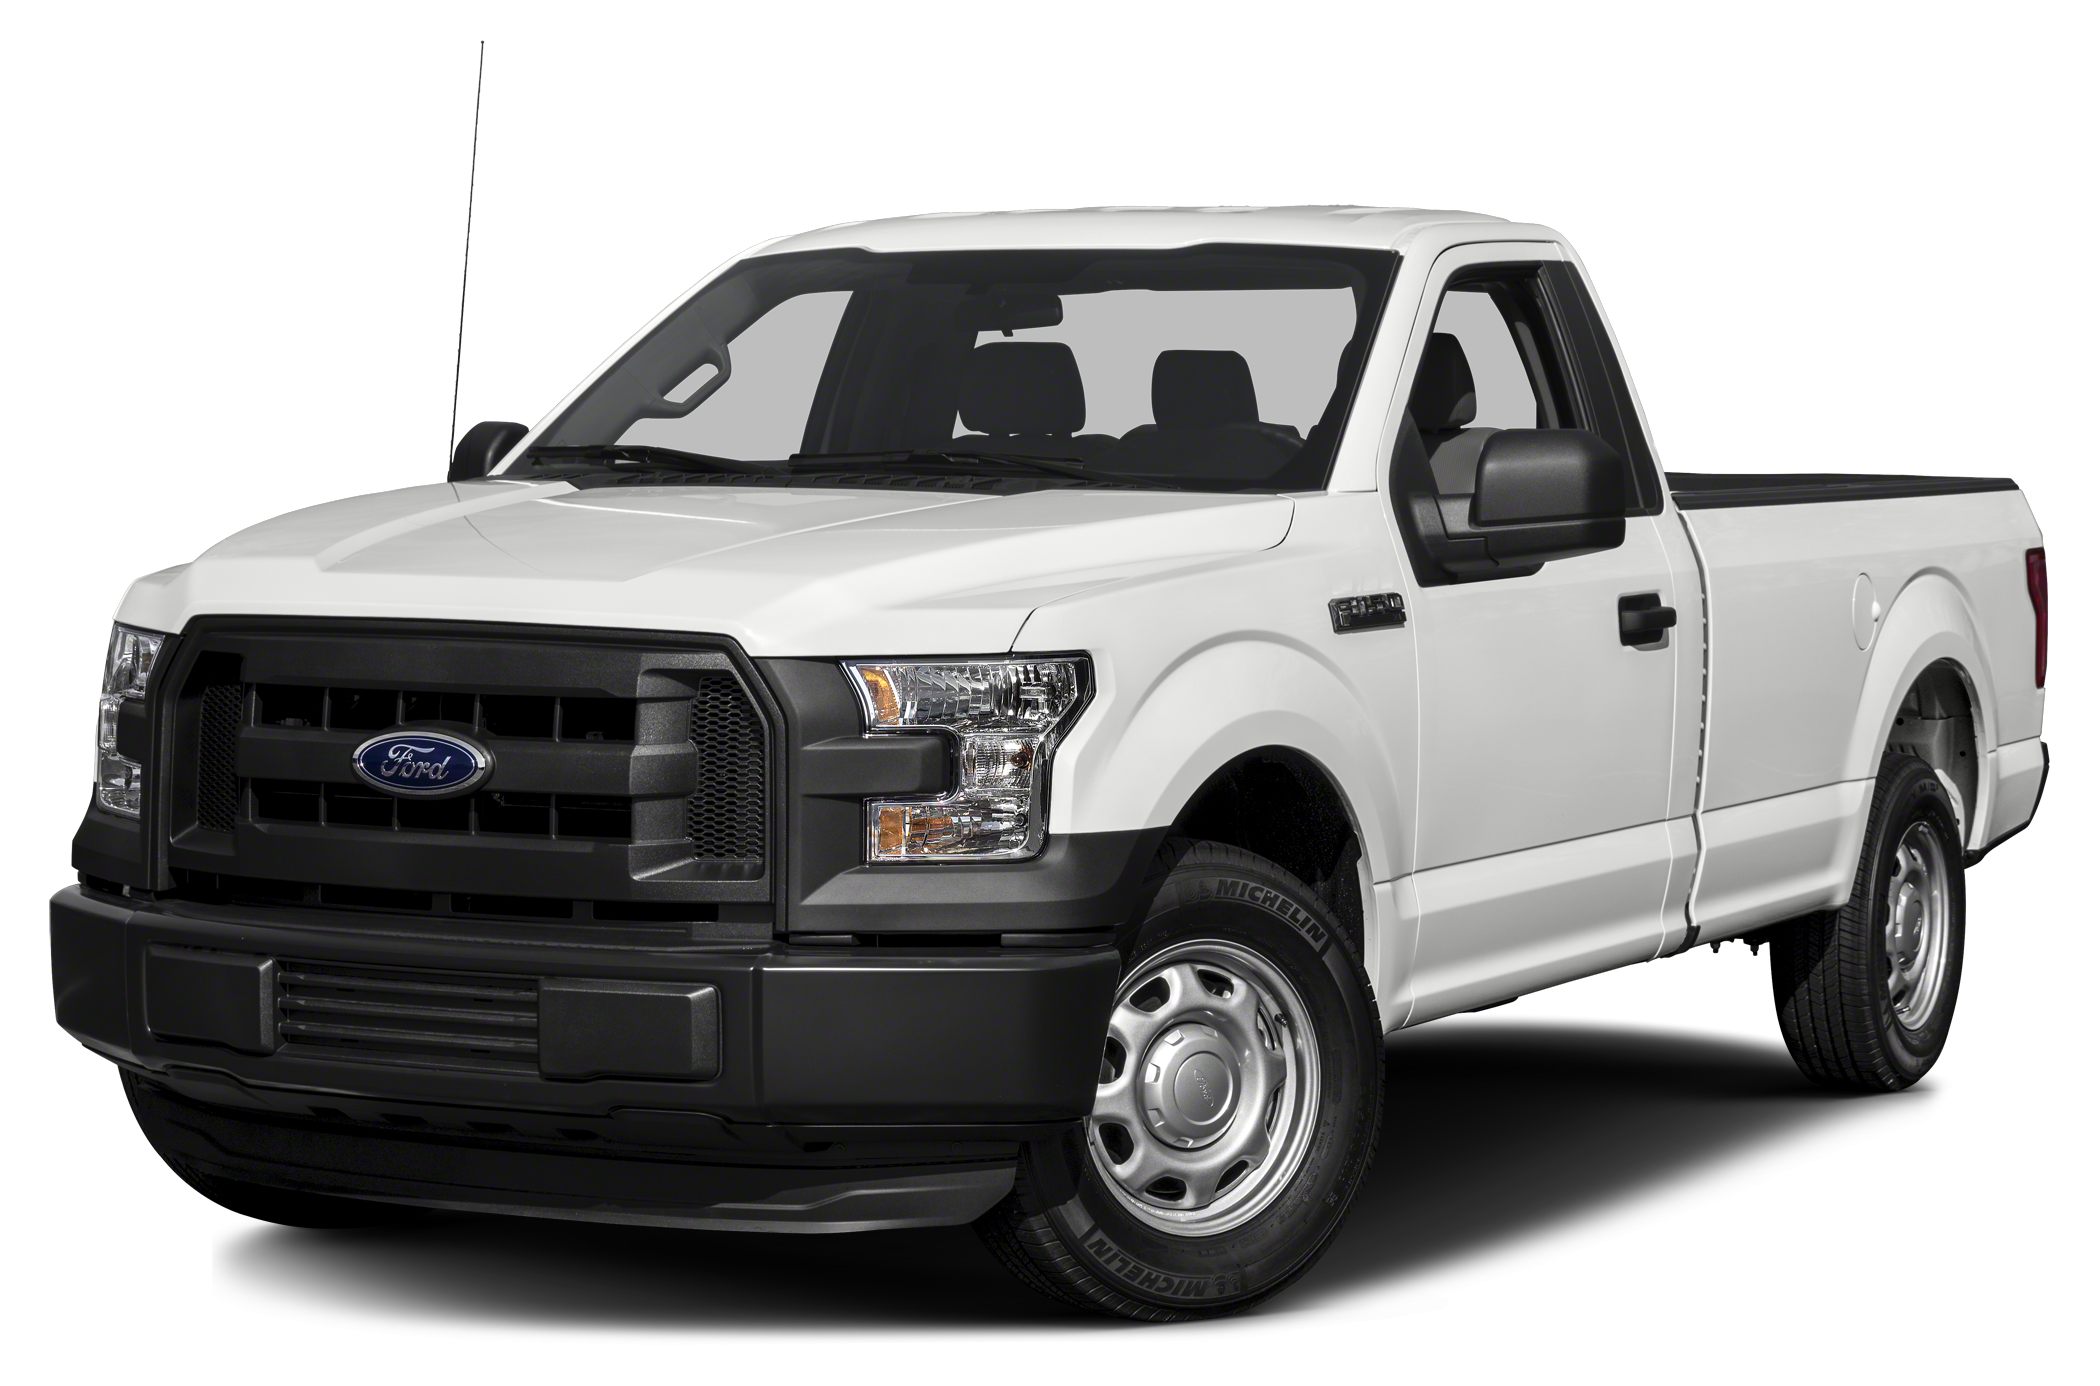 Ford F150 Wallpapers Vehicles Hq Ford F150 Pictures 4k Wallpapers 2019